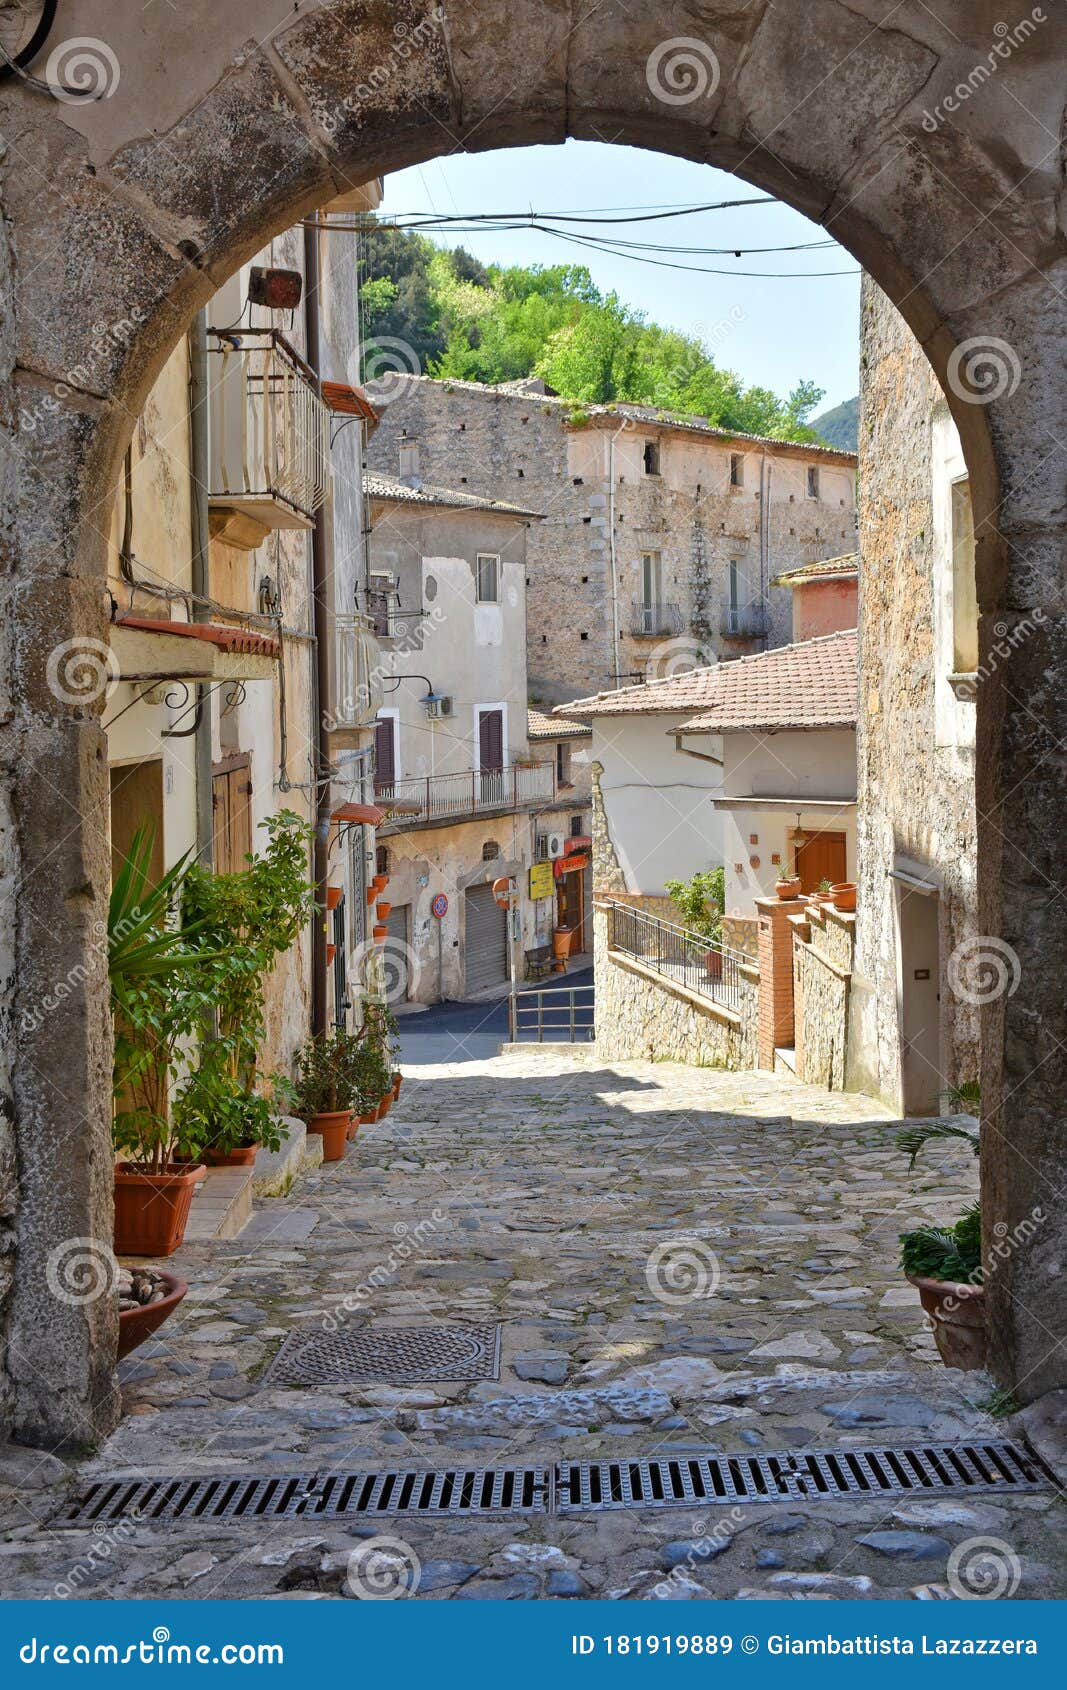 the architecture of the old town of itri in the lazio region, italy.